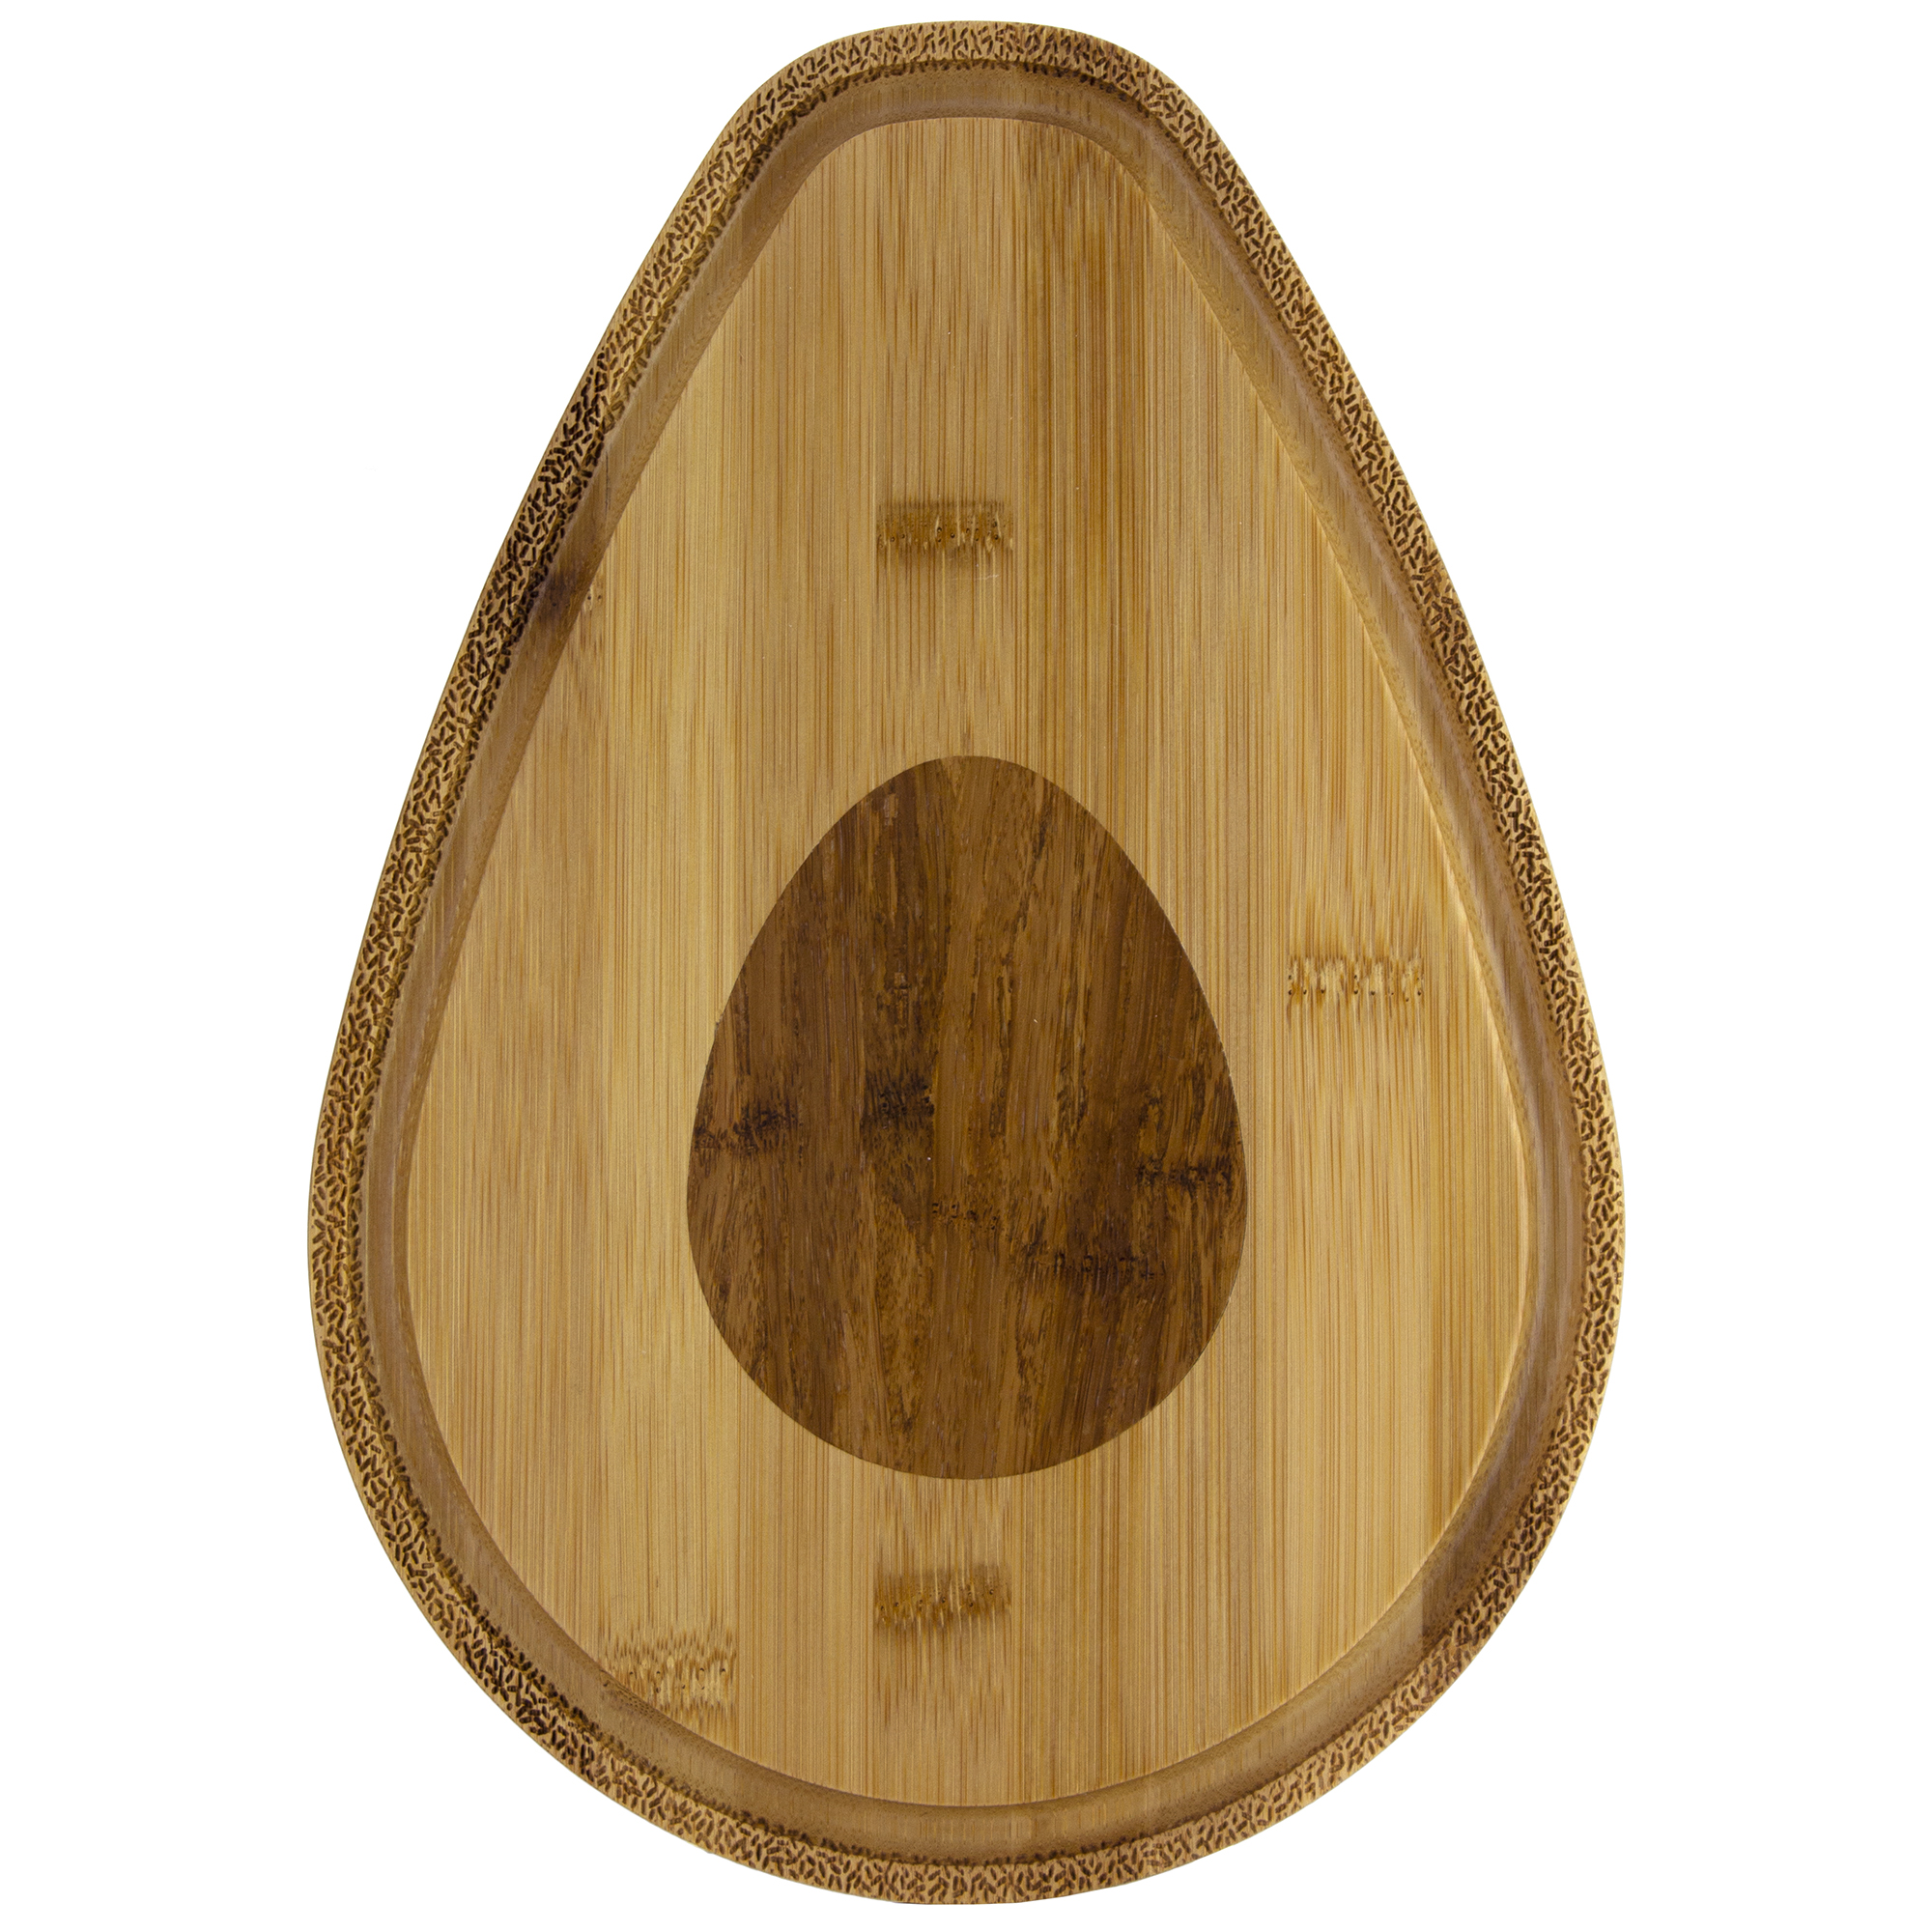 Totally Bamboo Avocado Obsession Eco-Friendly Serving and Cutting Board, Medium - image 1 of 5